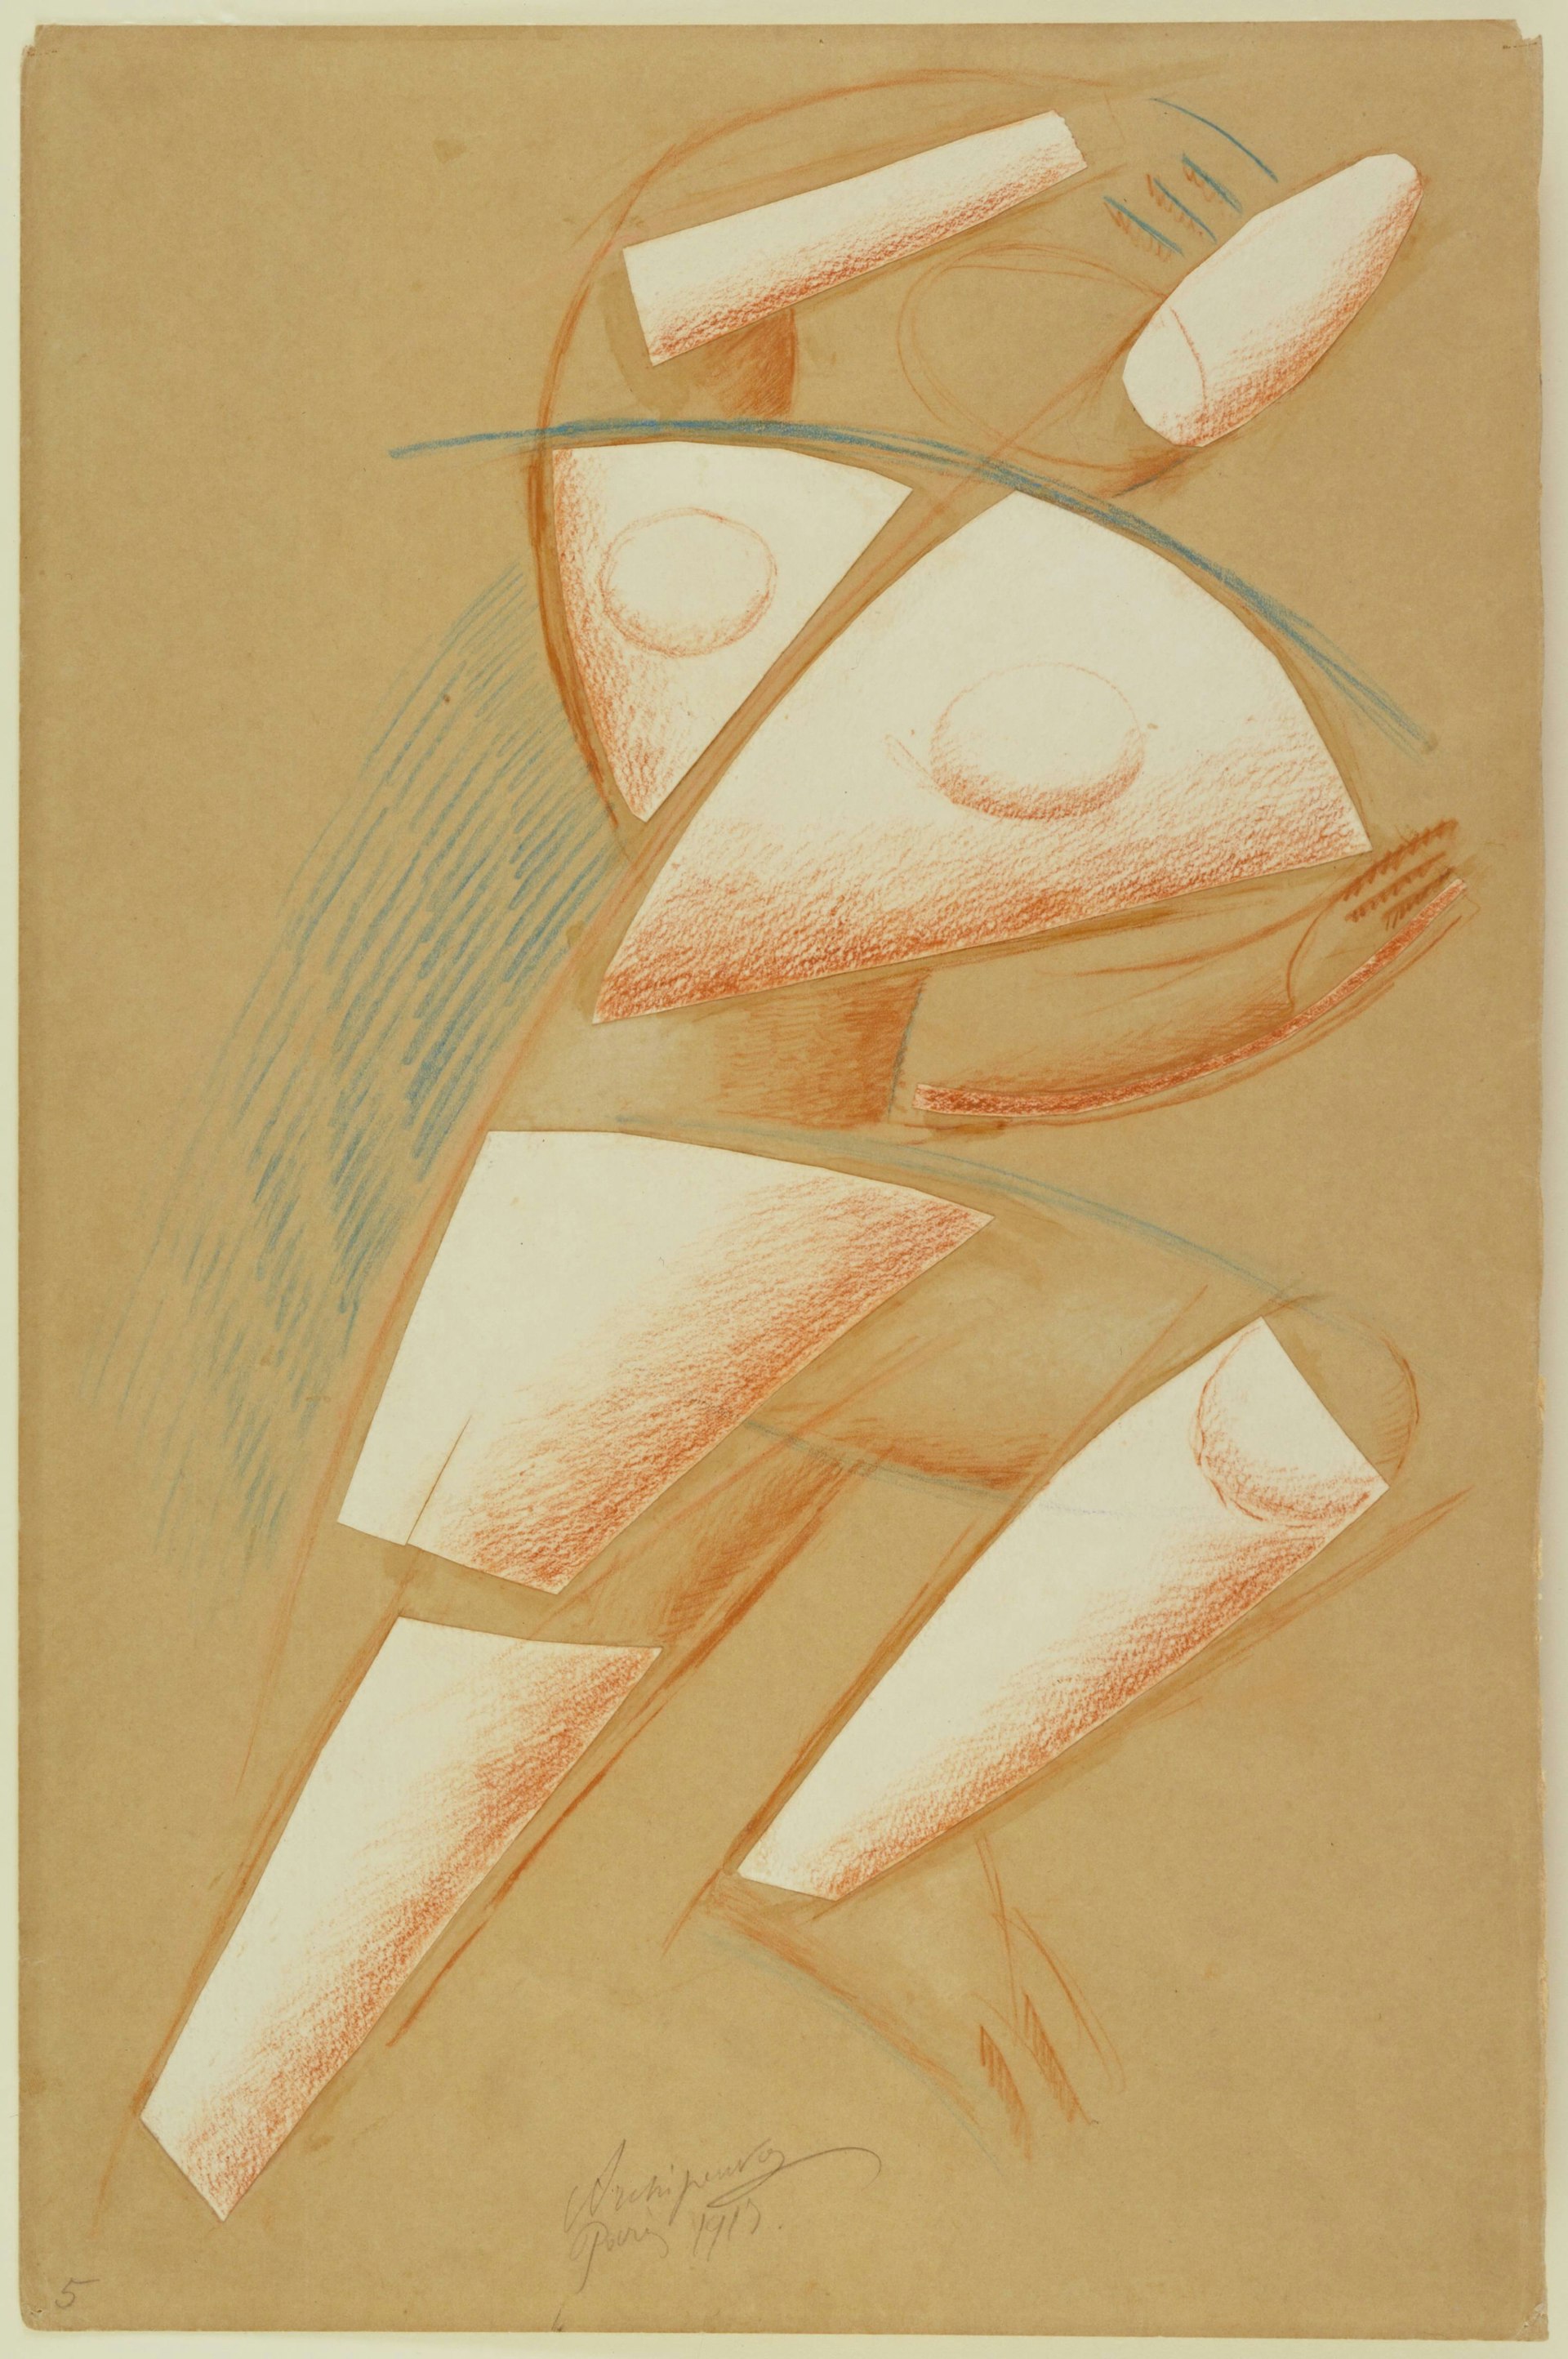 An abstract figure made from cut-and-pasted painted paper, conté crayon, and colored pencil on colored paper